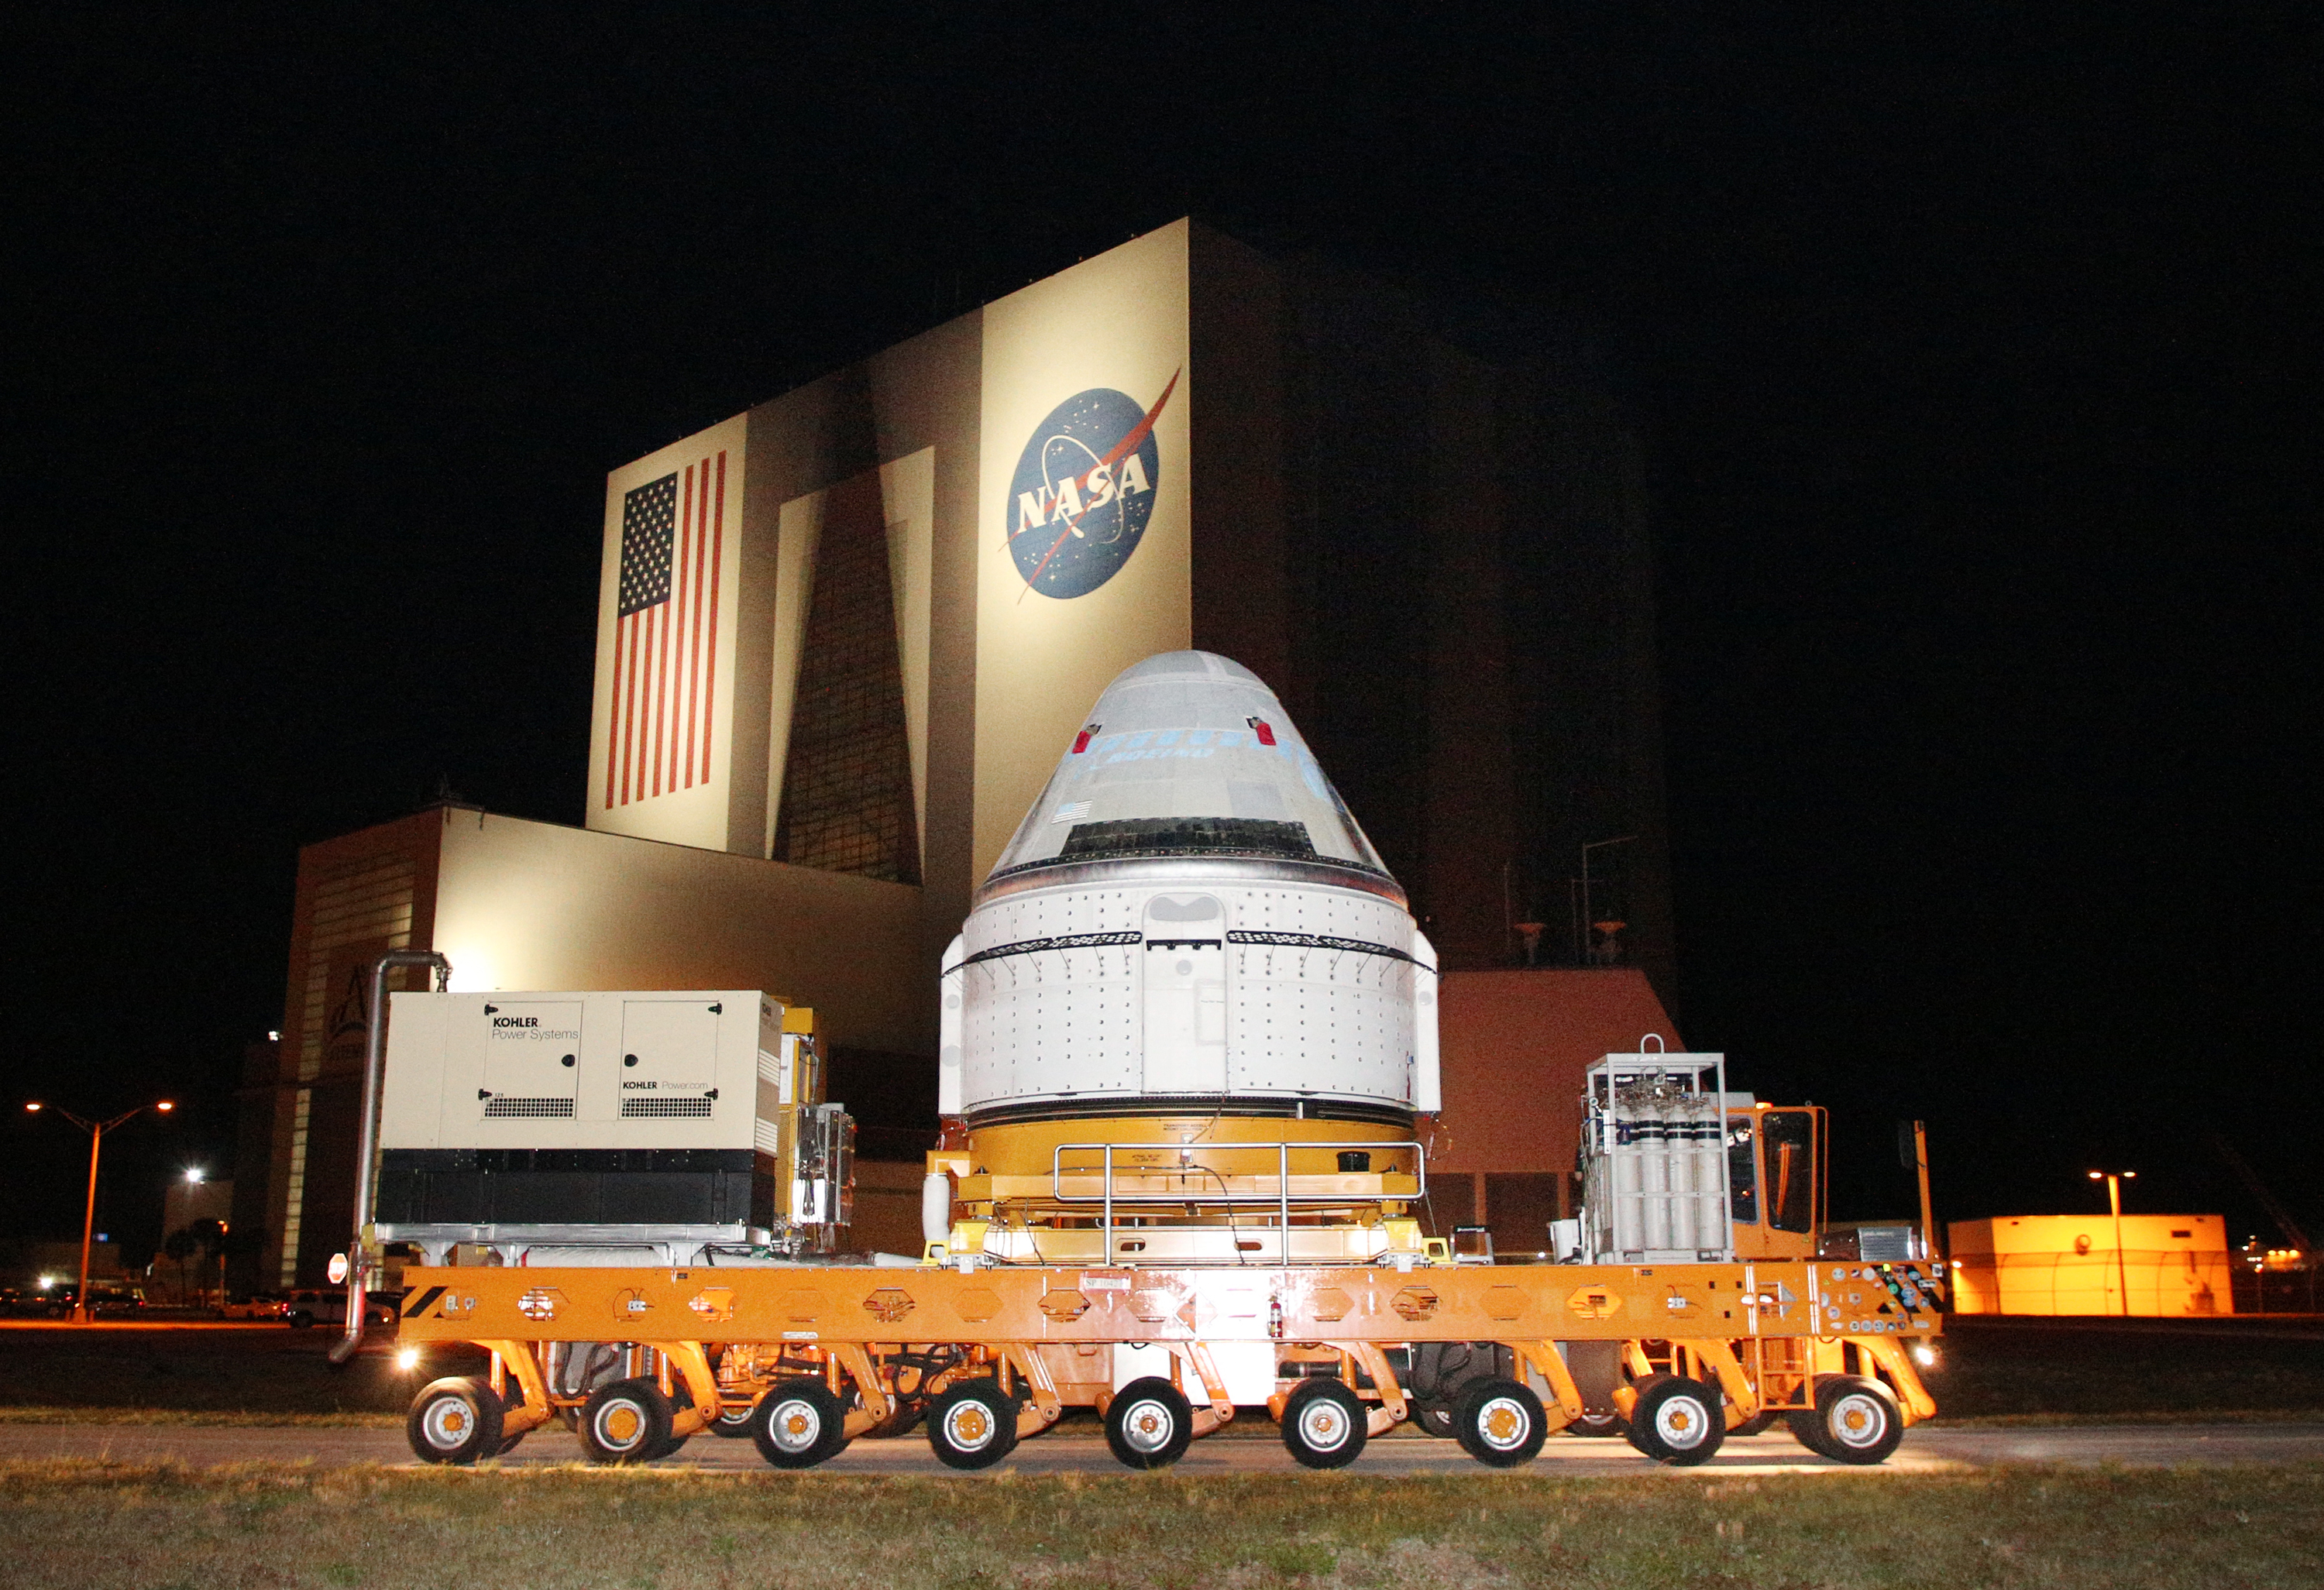 <p>A Boeing CST-100 Starliner spacecraft was rolled out from Boeing's Commercial Cargo and Processing Facility in the pre-dawn hours of April 16, 2024, past the Vehicle Assembly Building at the Kennedy Space Center in Cape Canaveral, Florida. </p><p>NASA is targeting a May 2024 launch for the Crew Flight Test-1 (CFT-1) mission to the International Space Station with astronauts Barry Wilmore and Sunita Williams. </p><p>A United Launch Alliance (ULA) Atlas 5 rocket will ferry the Boeing capsule on its historic first flight of the new, crewed spacecraft. </p>